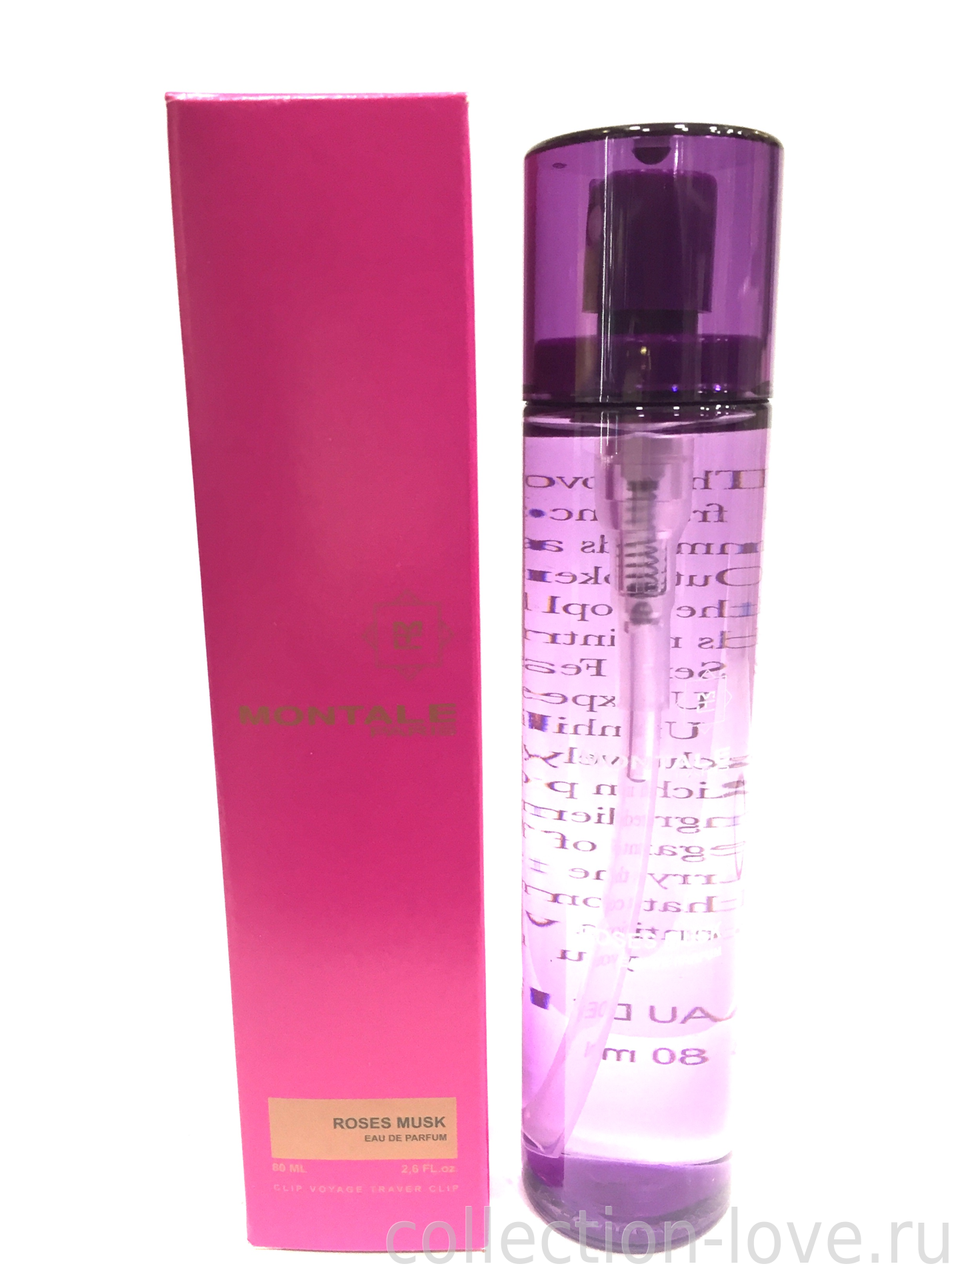 MONTALE ROSES MUSK 80мл - фото 1 - id-p49989078